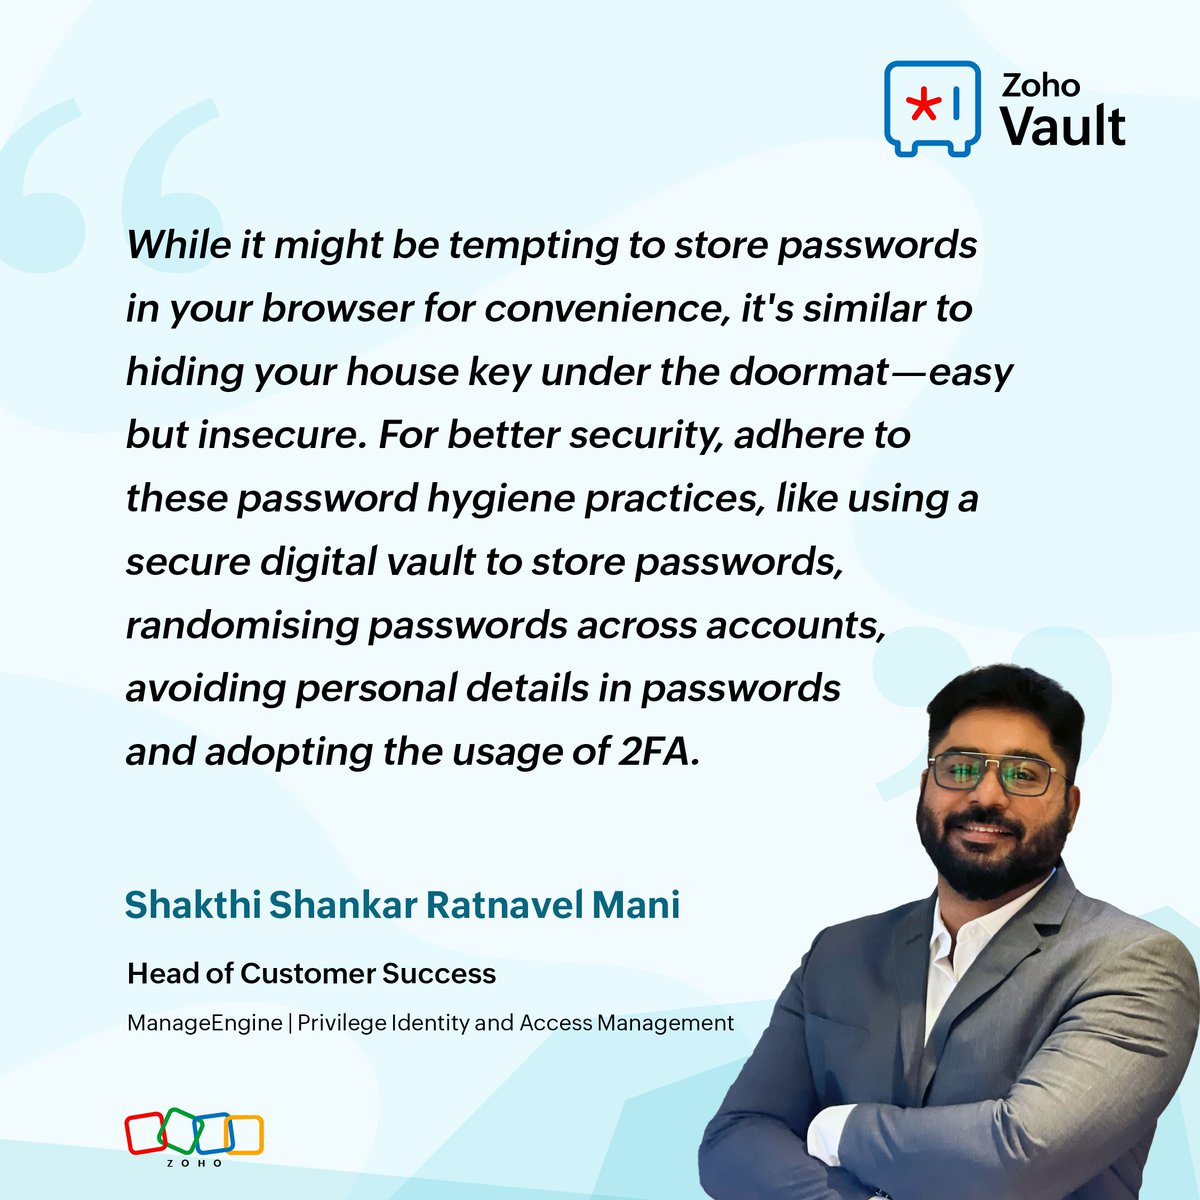 Stop letting your browser remember your passwords! 

Learn password security tip from @ShakthiShankaRm, Head of Customer Success, @manageengine, Privilege Identity and Access Management. 😀

#WorldPasswordDay #StaySafeOnline